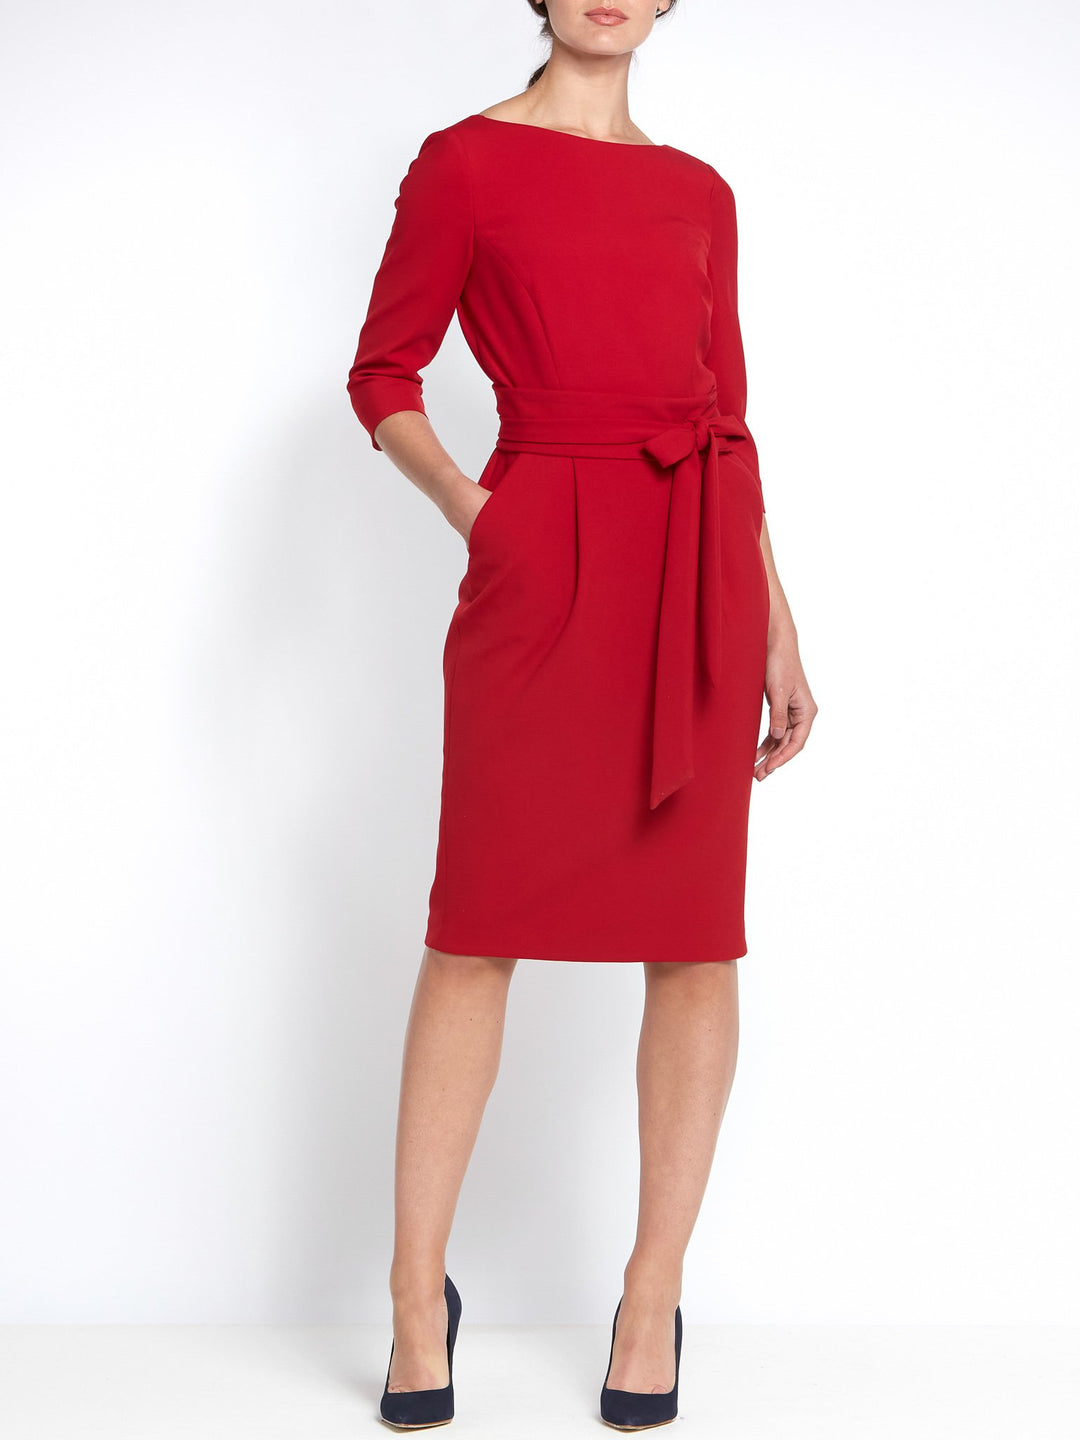 Helen McAlinden red obi dress A simple yet flattering slash neck piece with a pencil skirt that falls just below the knee, Women uk ourfit. Buy women clothes online. Dress for mother of the bride. Dress for mother of the groom.